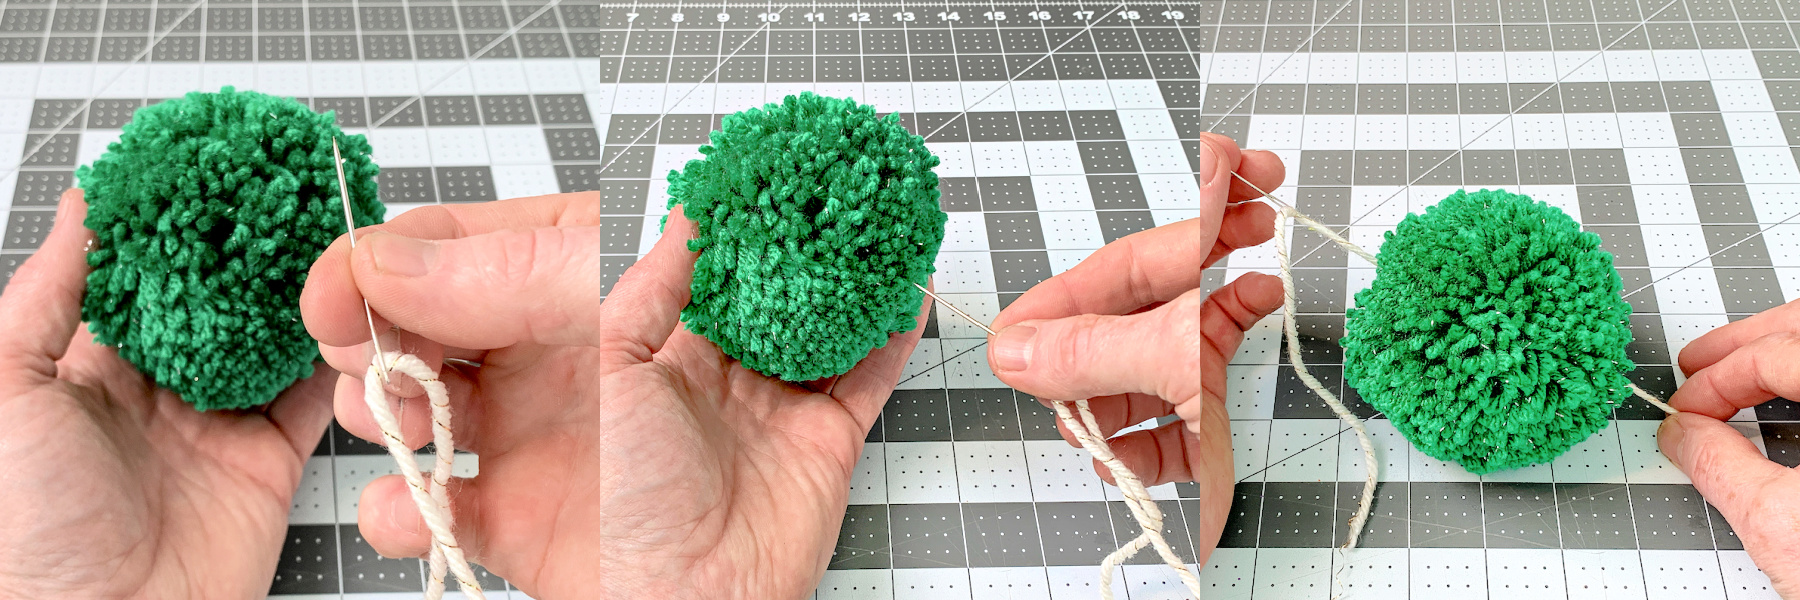 Yarn on a needle being inserted into a green pom pom